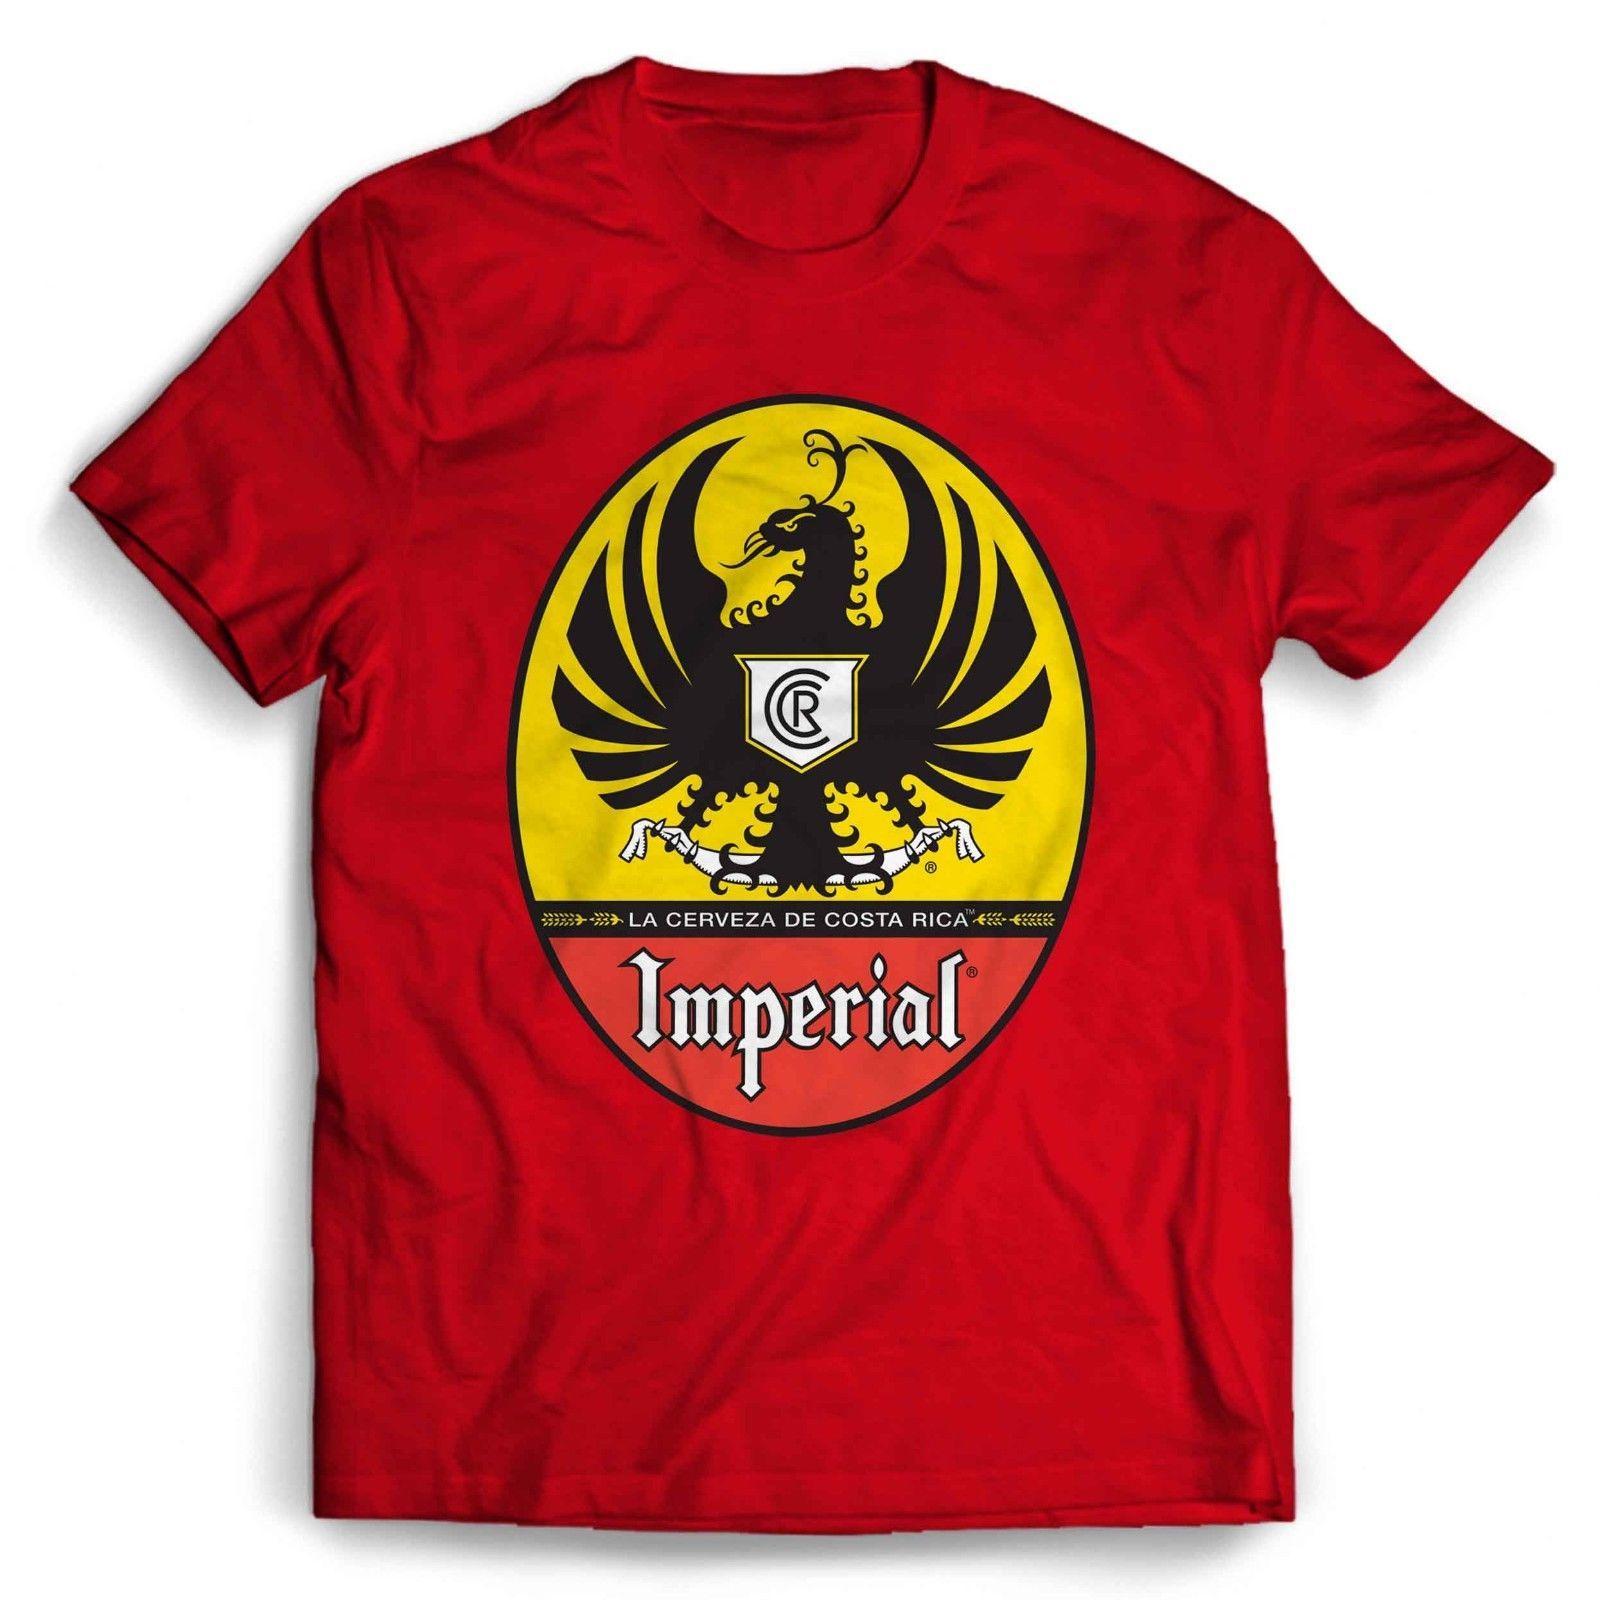 Funny Beer Logo - Imperial Beer Logo Man / Woman T Shirt Funny Casual Tshirt Top Funny ...